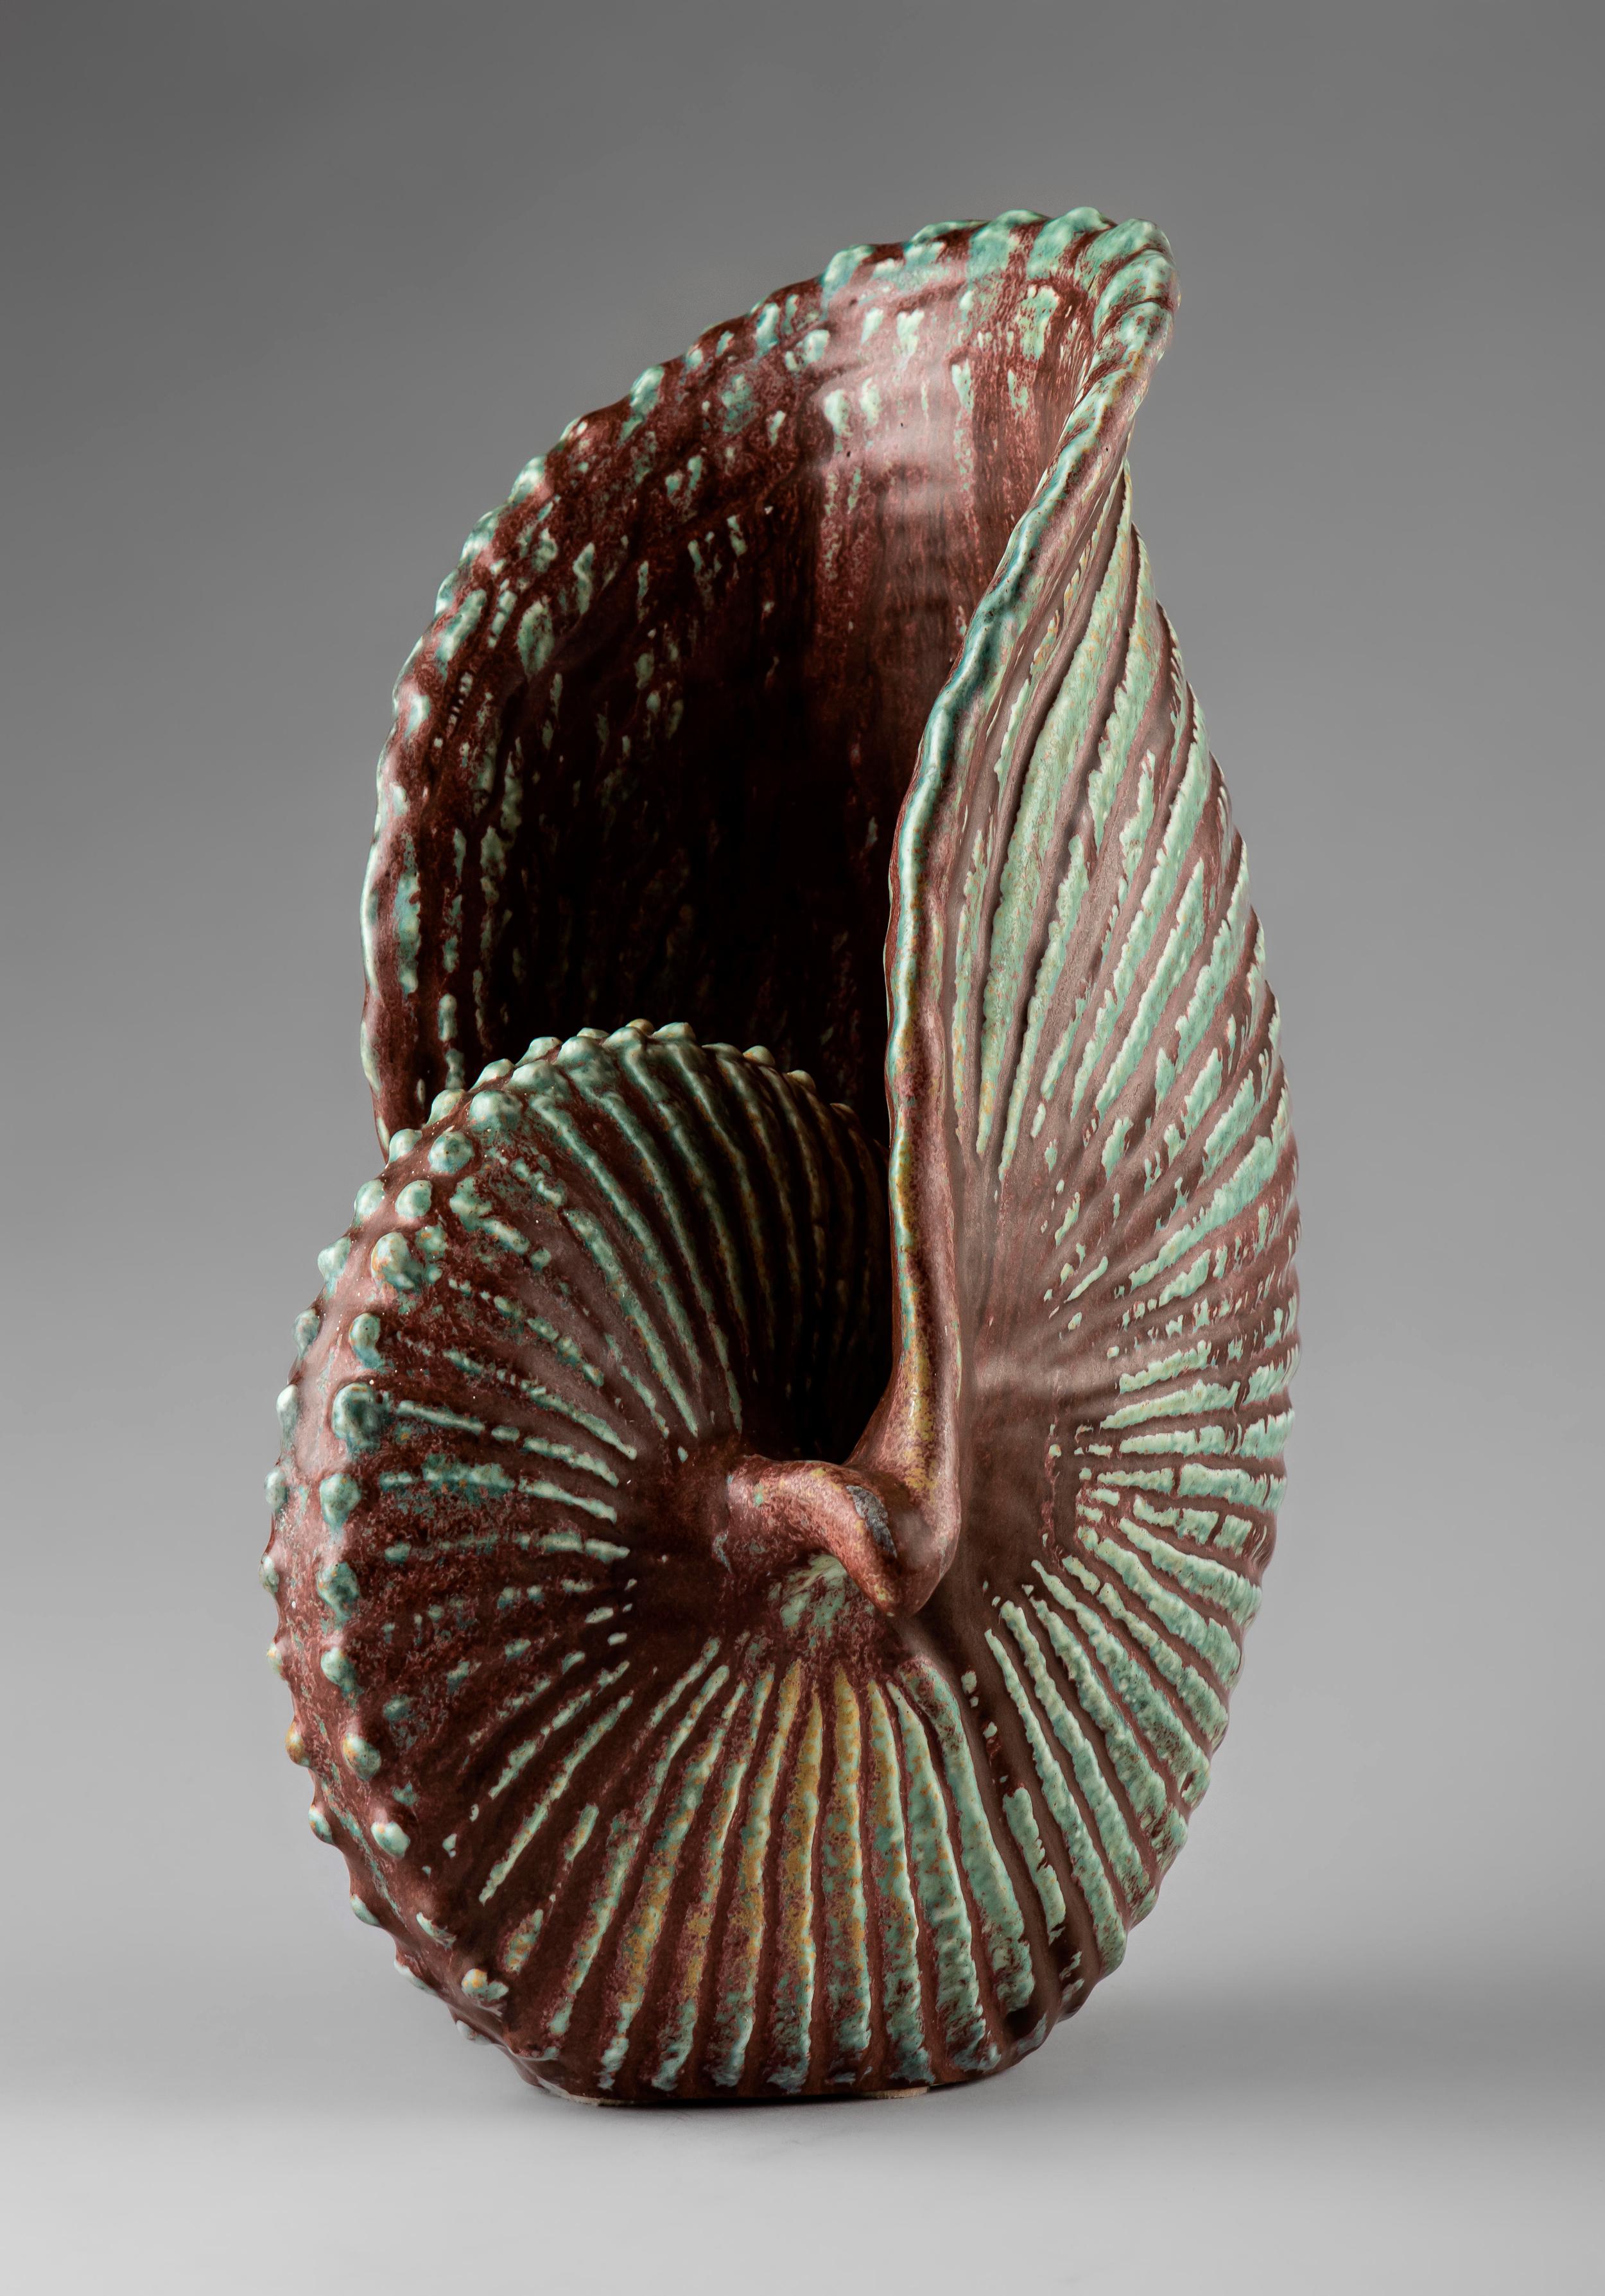 Stunning stoneware sculpture by Gunnar Nylund in the shape of a shell. Beautifully executed with close resemblance to a real shell. Muted green glaze with a thin grainy red glaze running like sand over the body.